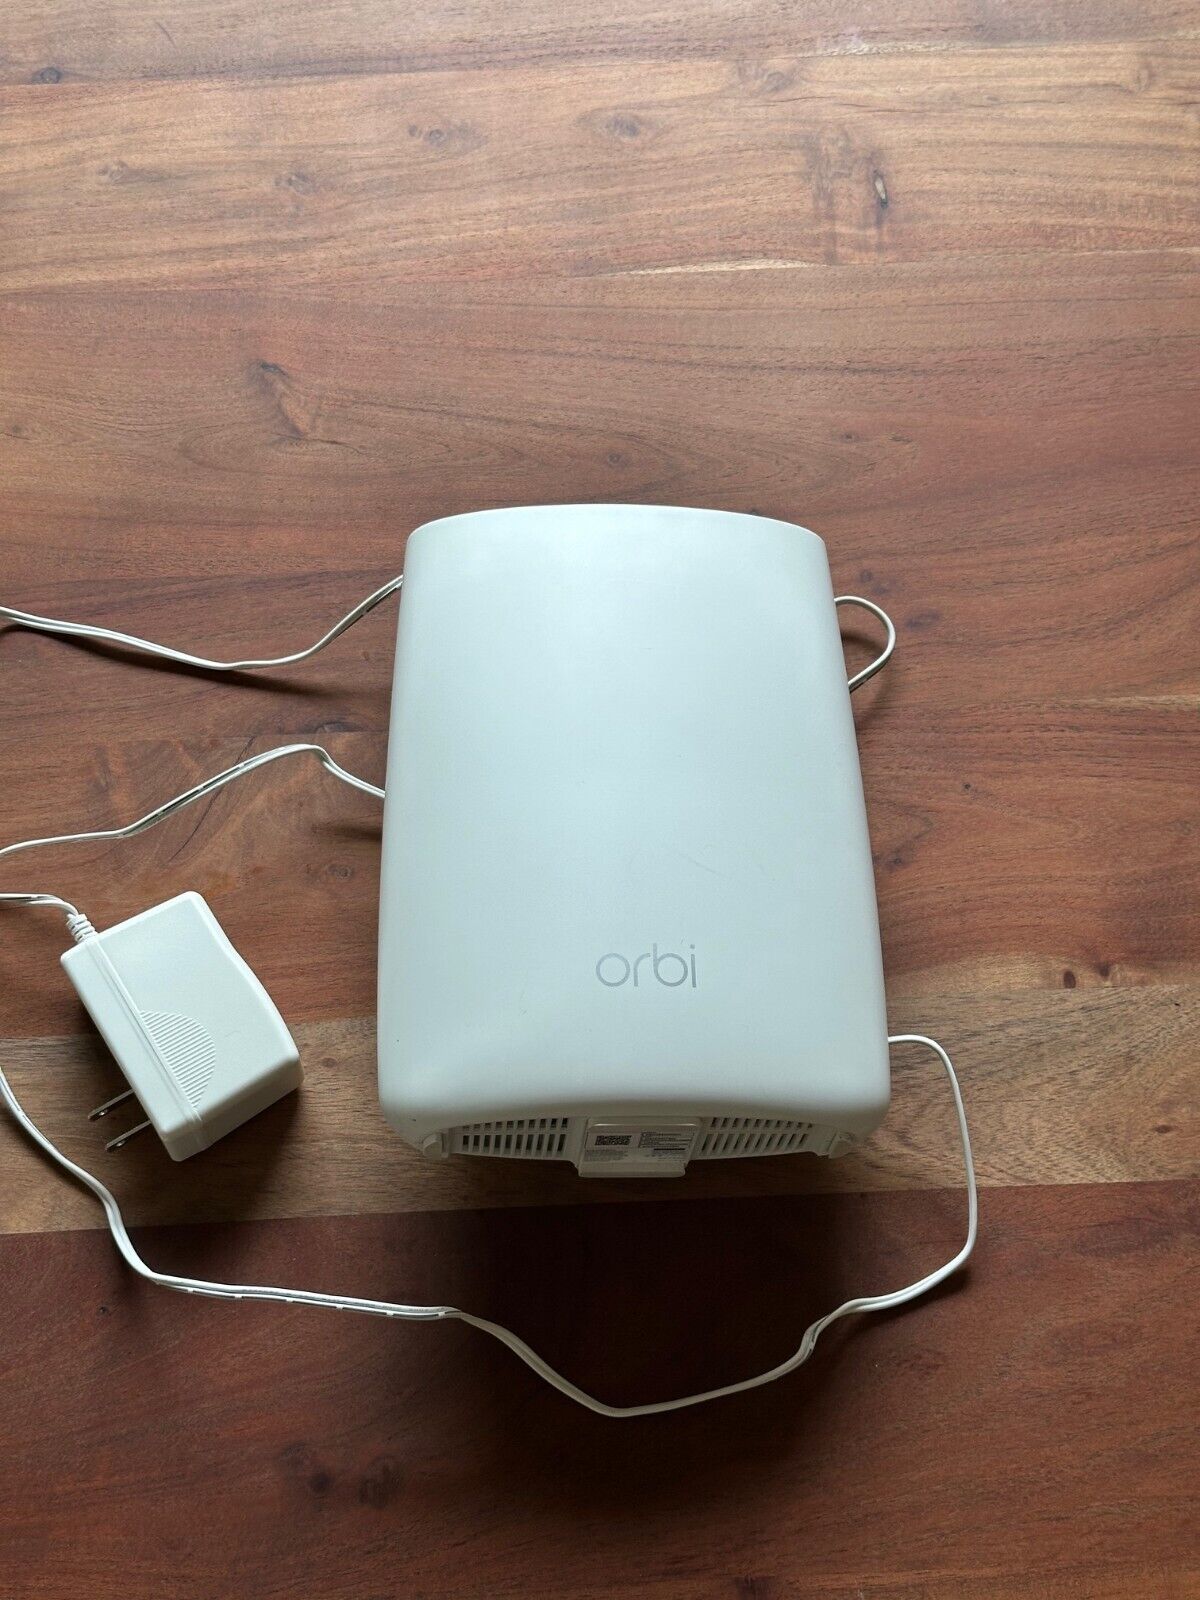 Netgear Orbi tri-band wireless wifi router pair: RBR50v2 and RBS50v2